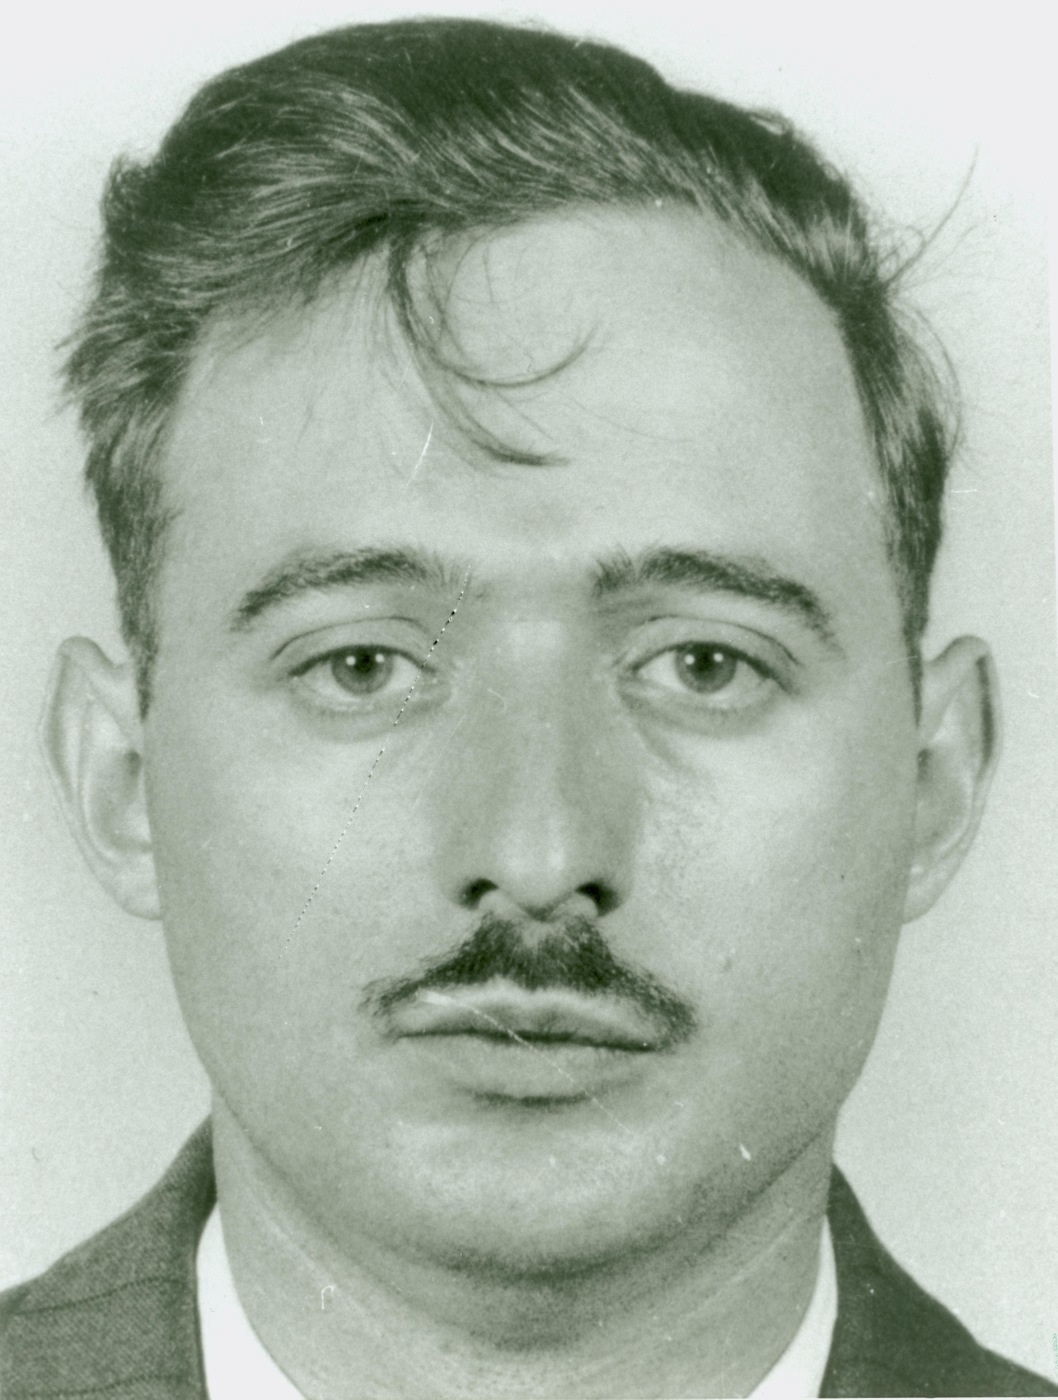 Julius Rosenberg, New York engineer, convicted of espionage in 1951 and executed on June 19, 1953.